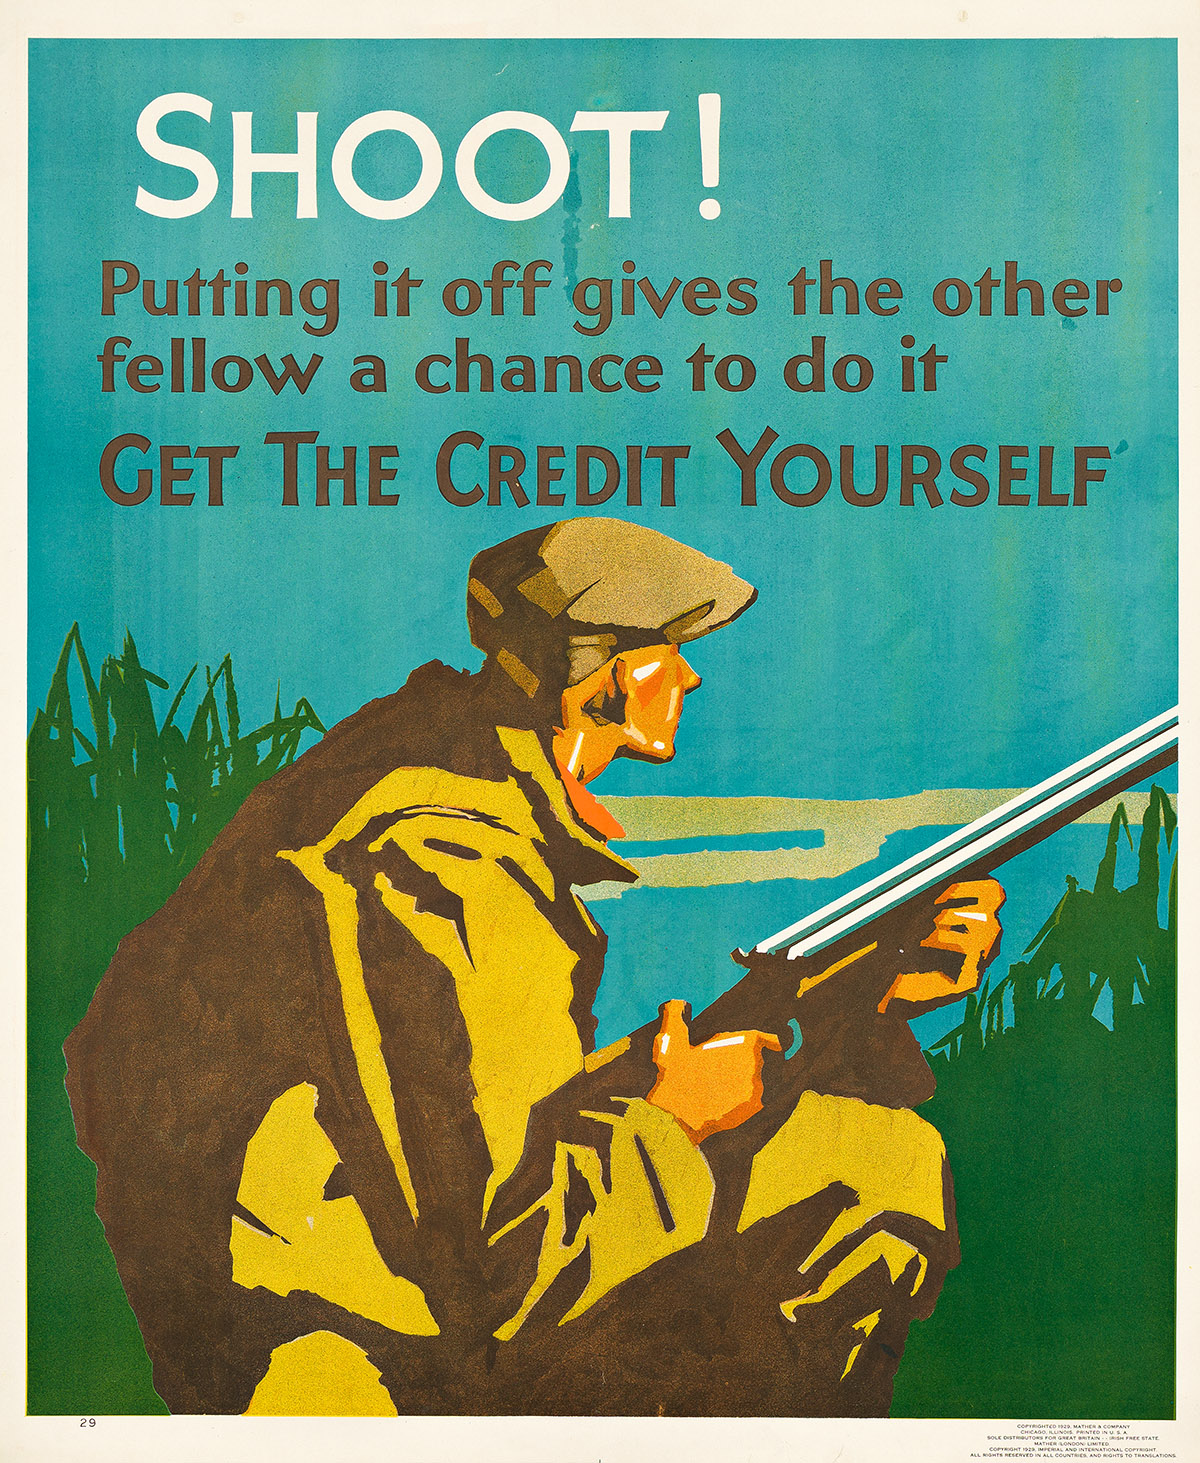 DESIGNER UNKNOWN. SHOOT! / GET THE CREDIT YOURSELF. 1929. 43x35½ inches, 109¼x90¼ cm. Mather & Company, Chicago.